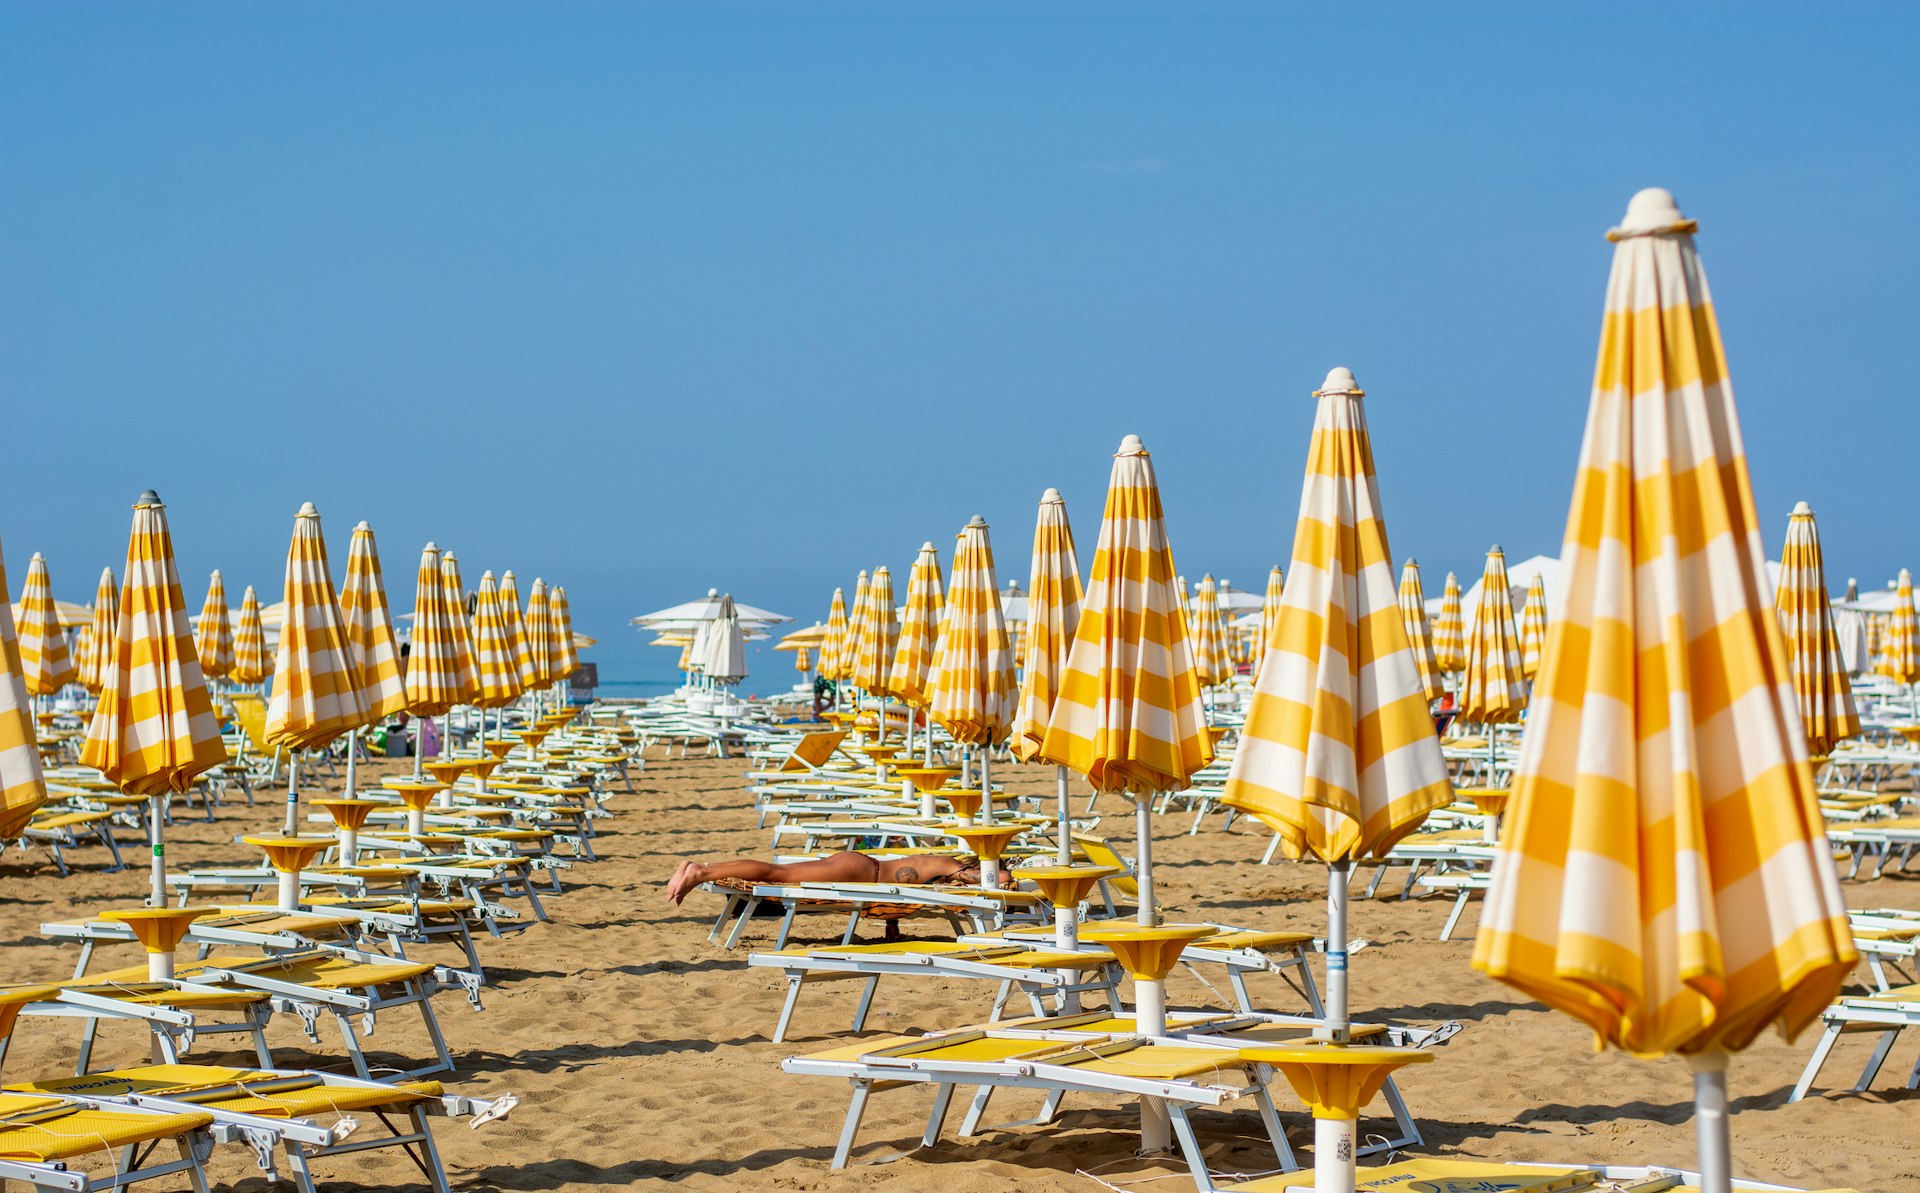 A row of yellow and white umbrellas and sunloungers with a sole figure sunbathing on a lounger on an otherwise empty beach